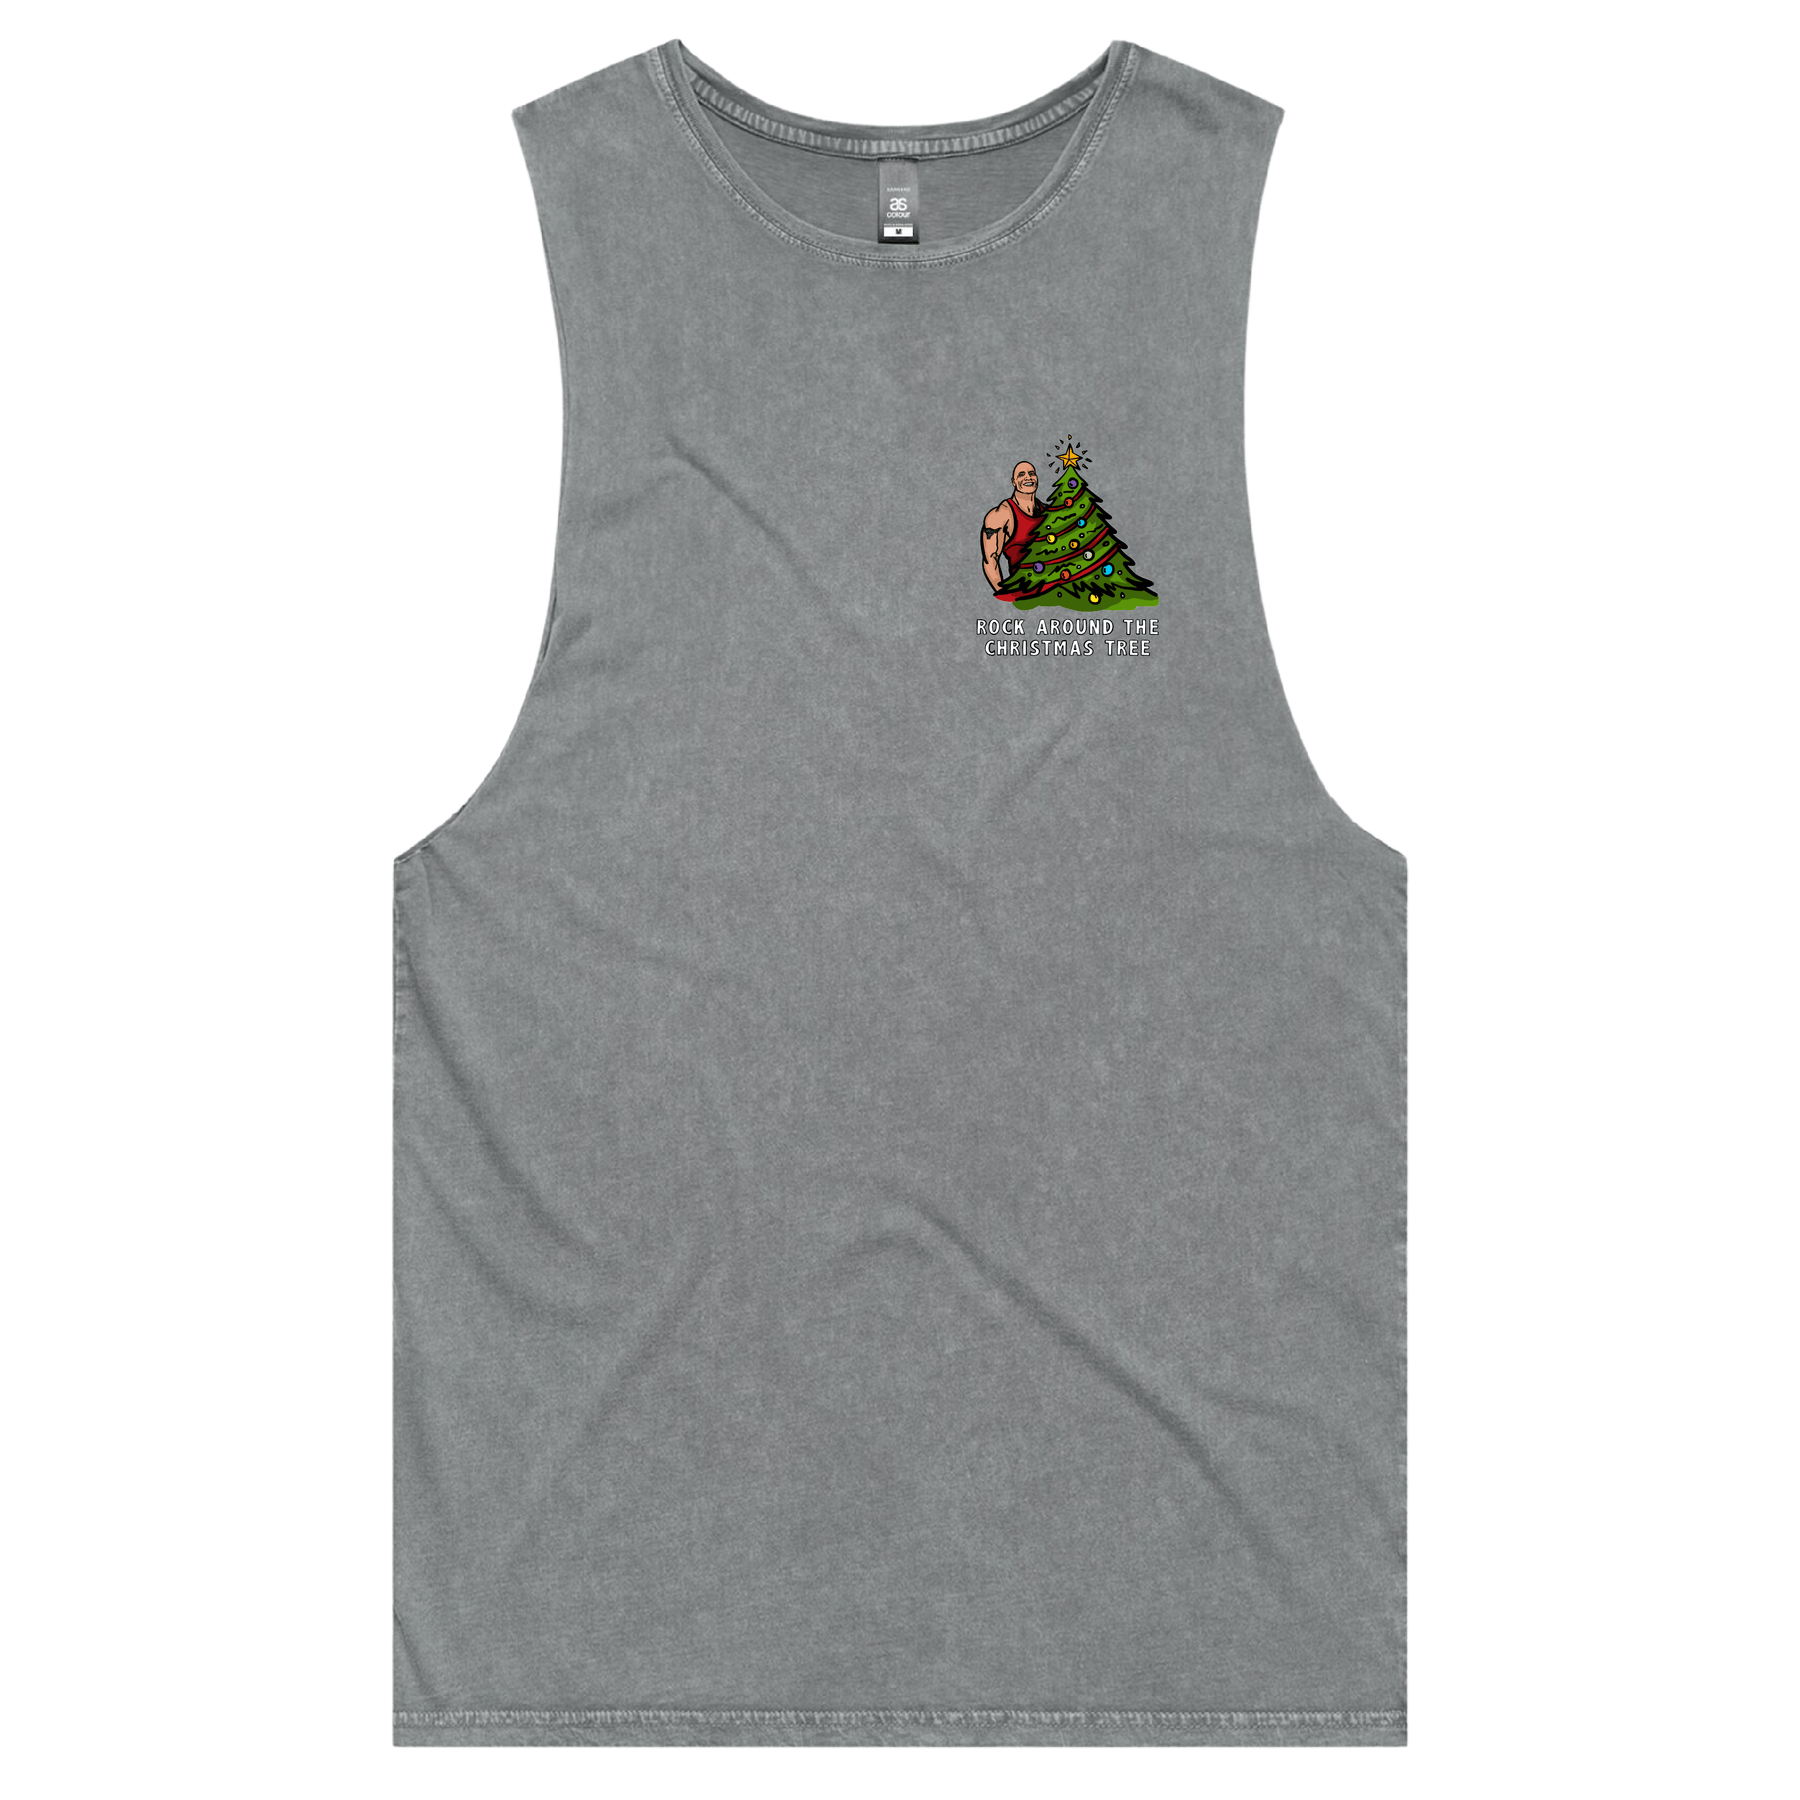 S / Ash / Small Front Design Rock Around The Christmas Tree 🎄 - Tank